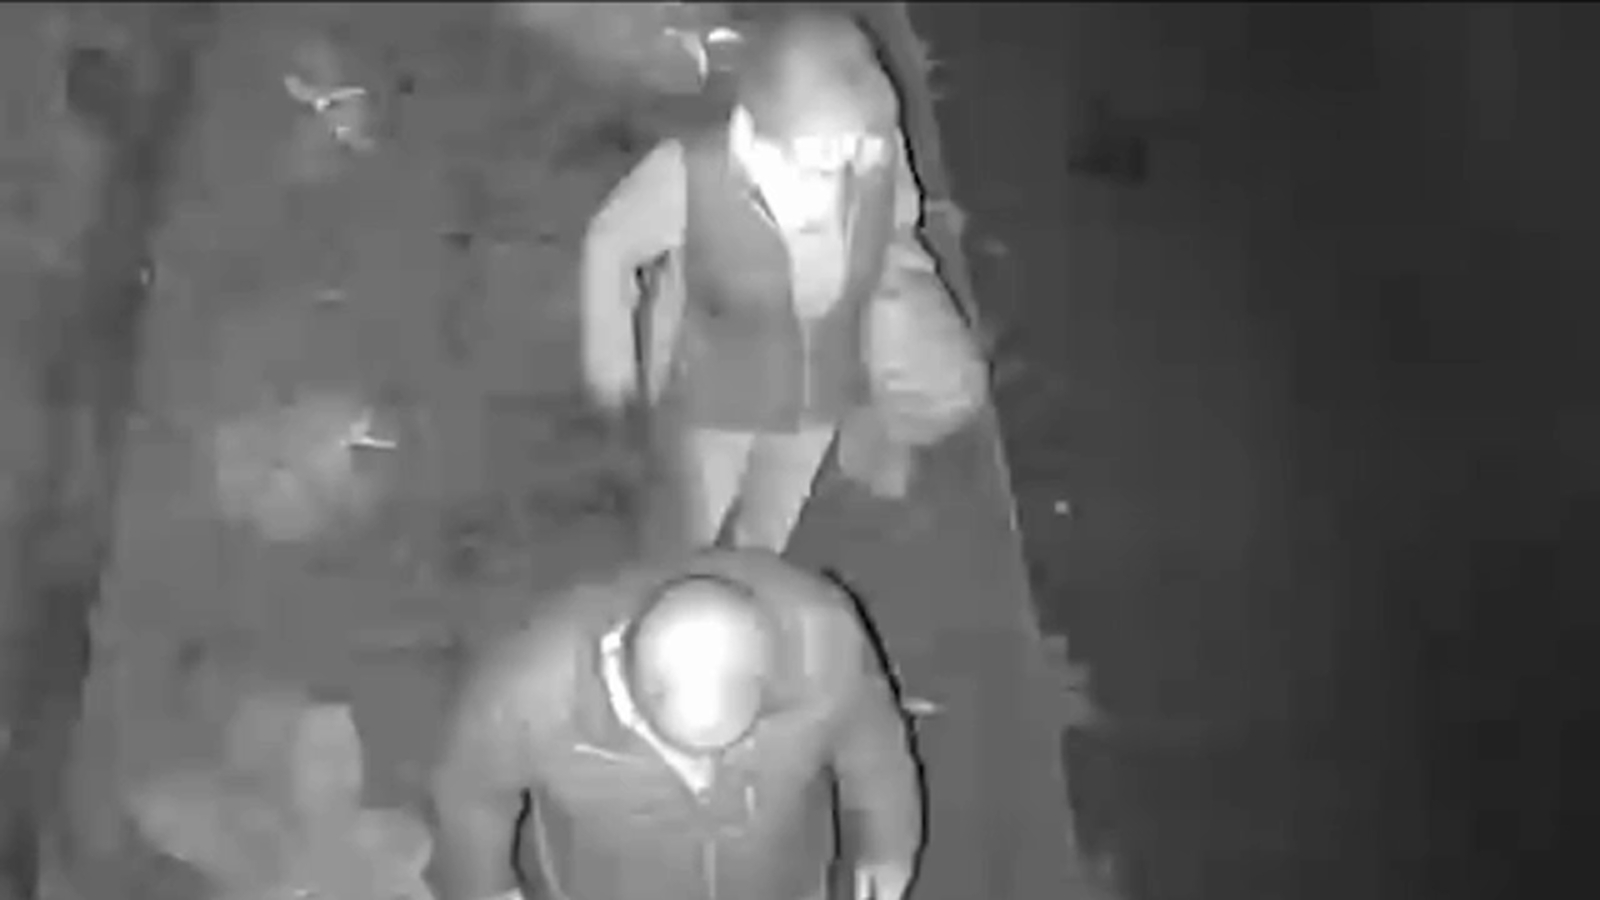 Westchester vandalism: Security video shows older couple destroying plants outside of a home in Edgemont